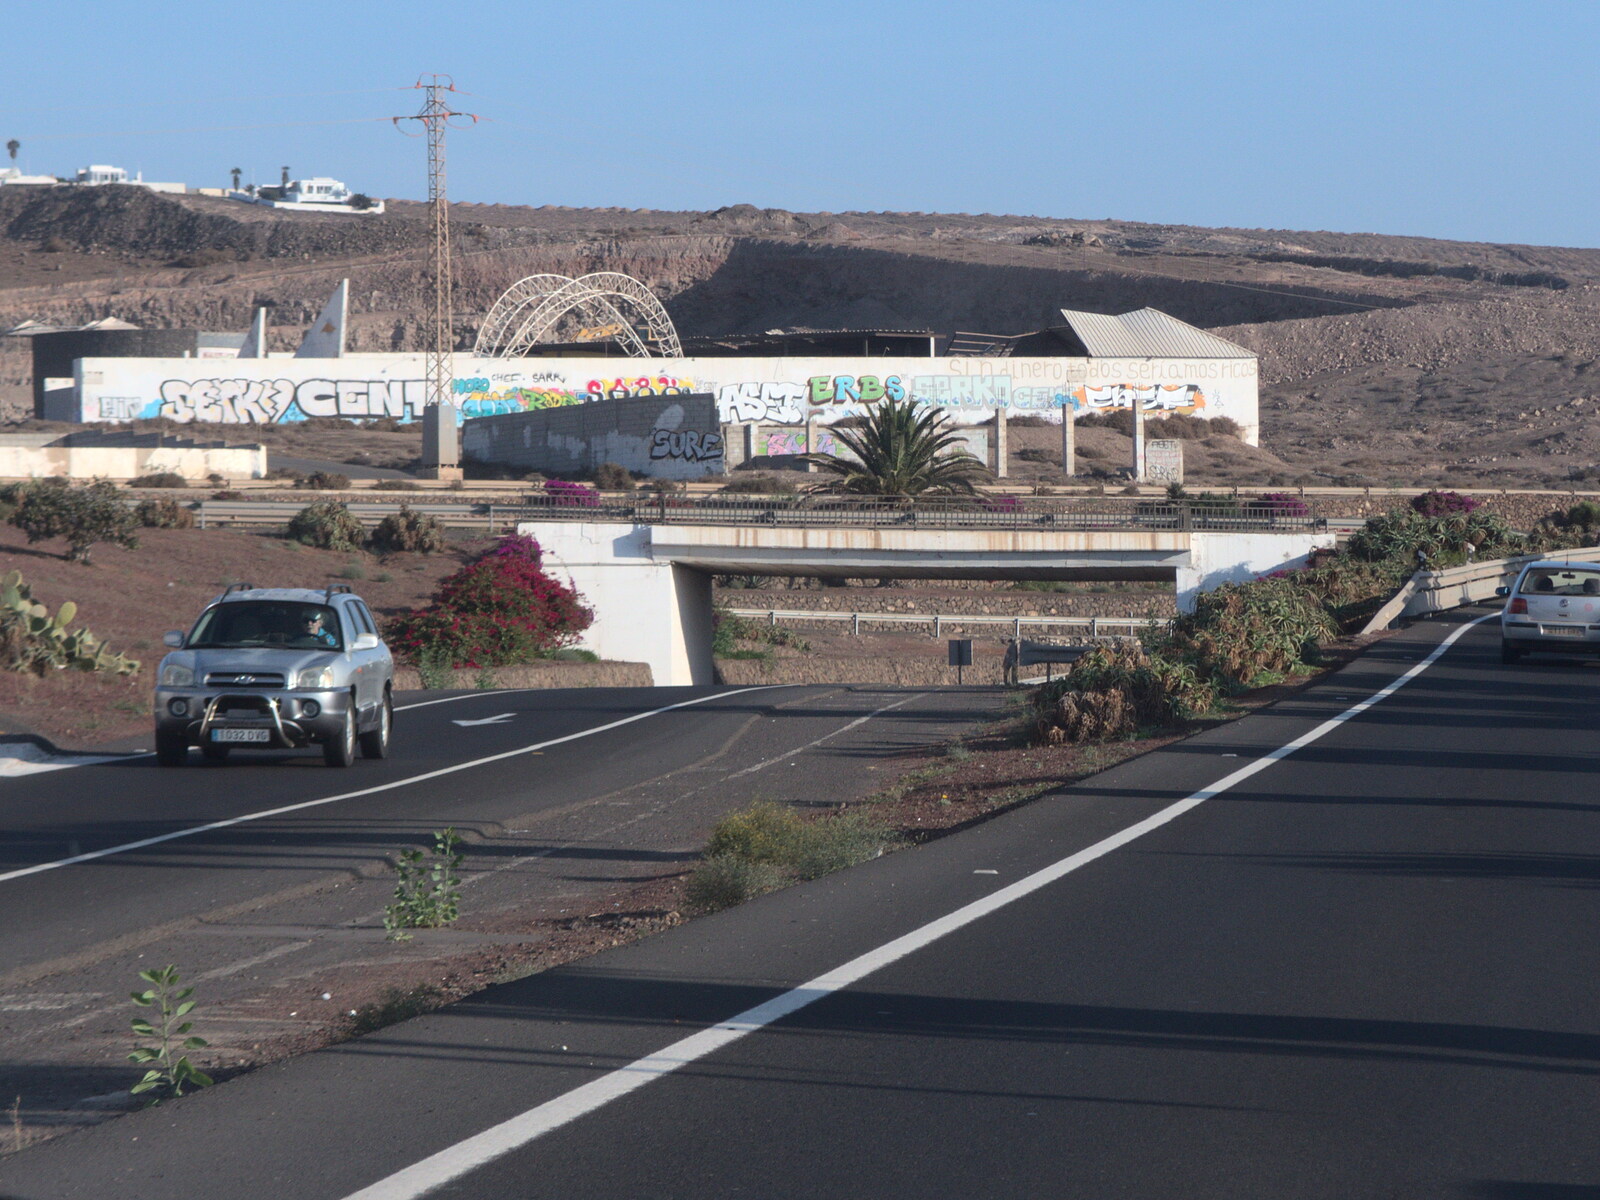 A derelict building on the way to the airport from The Volcanoes of Lanzarote, Canary Islands, Spain - 27th October 2021